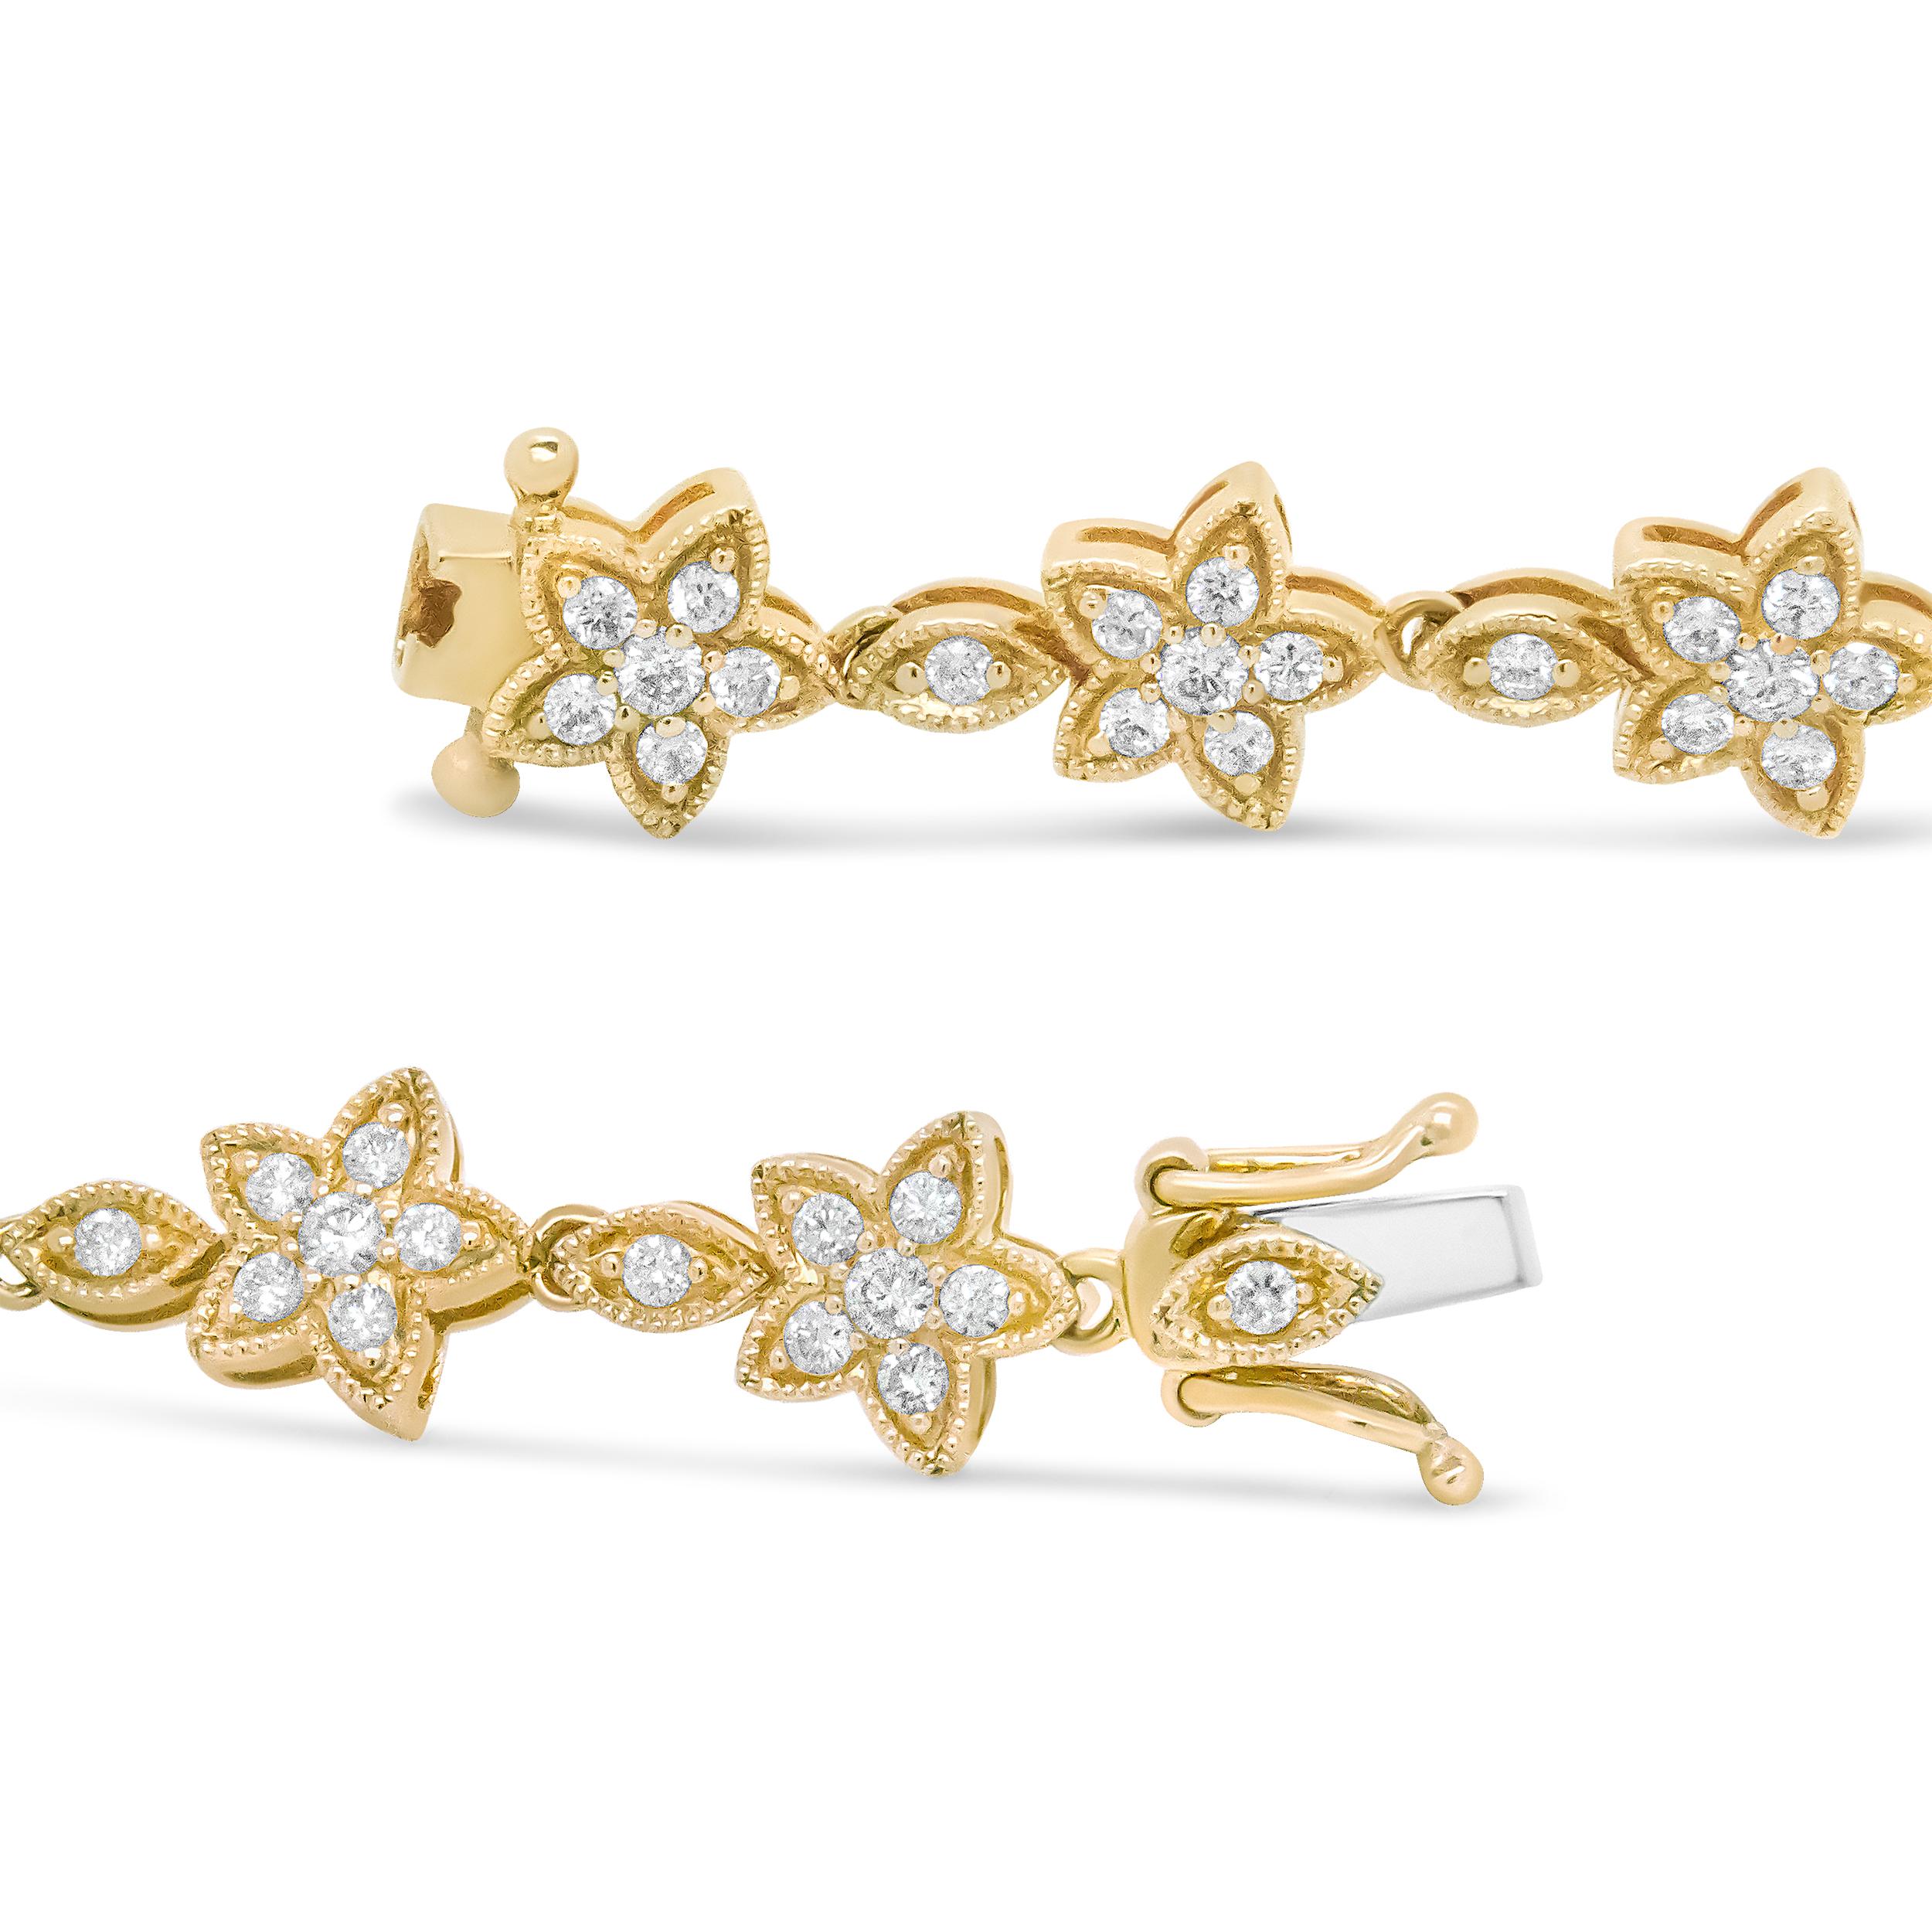 Contemporary 14K Yellow Gold 1 1/5 Carat Round Diamond Floral Star-Shaped Link Bracelet For Sale